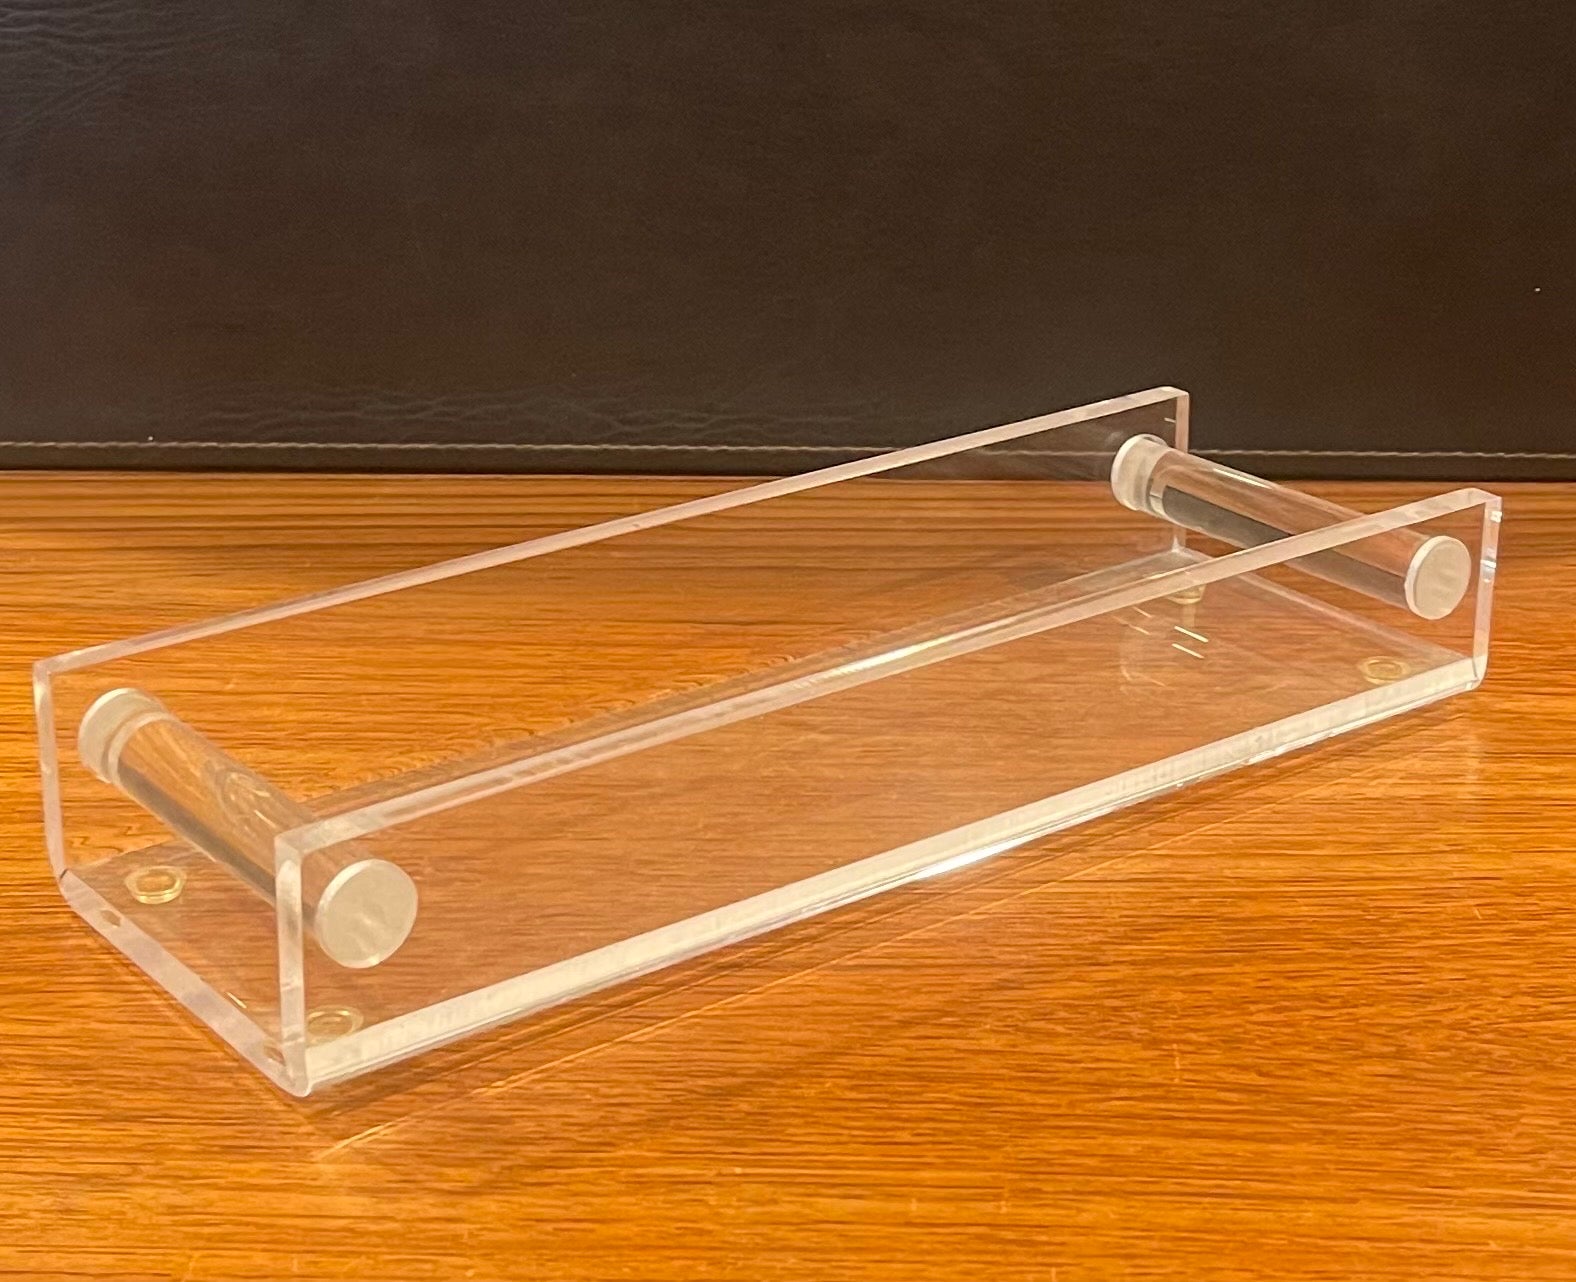 Post-modern lucite bath tray, circa 1980s. The tray would make a great bathroom piece for toiletries and works great with any post-modern, minimalist, contemporary or modern decor. The tray is in very good vintage condition and measures 13.25